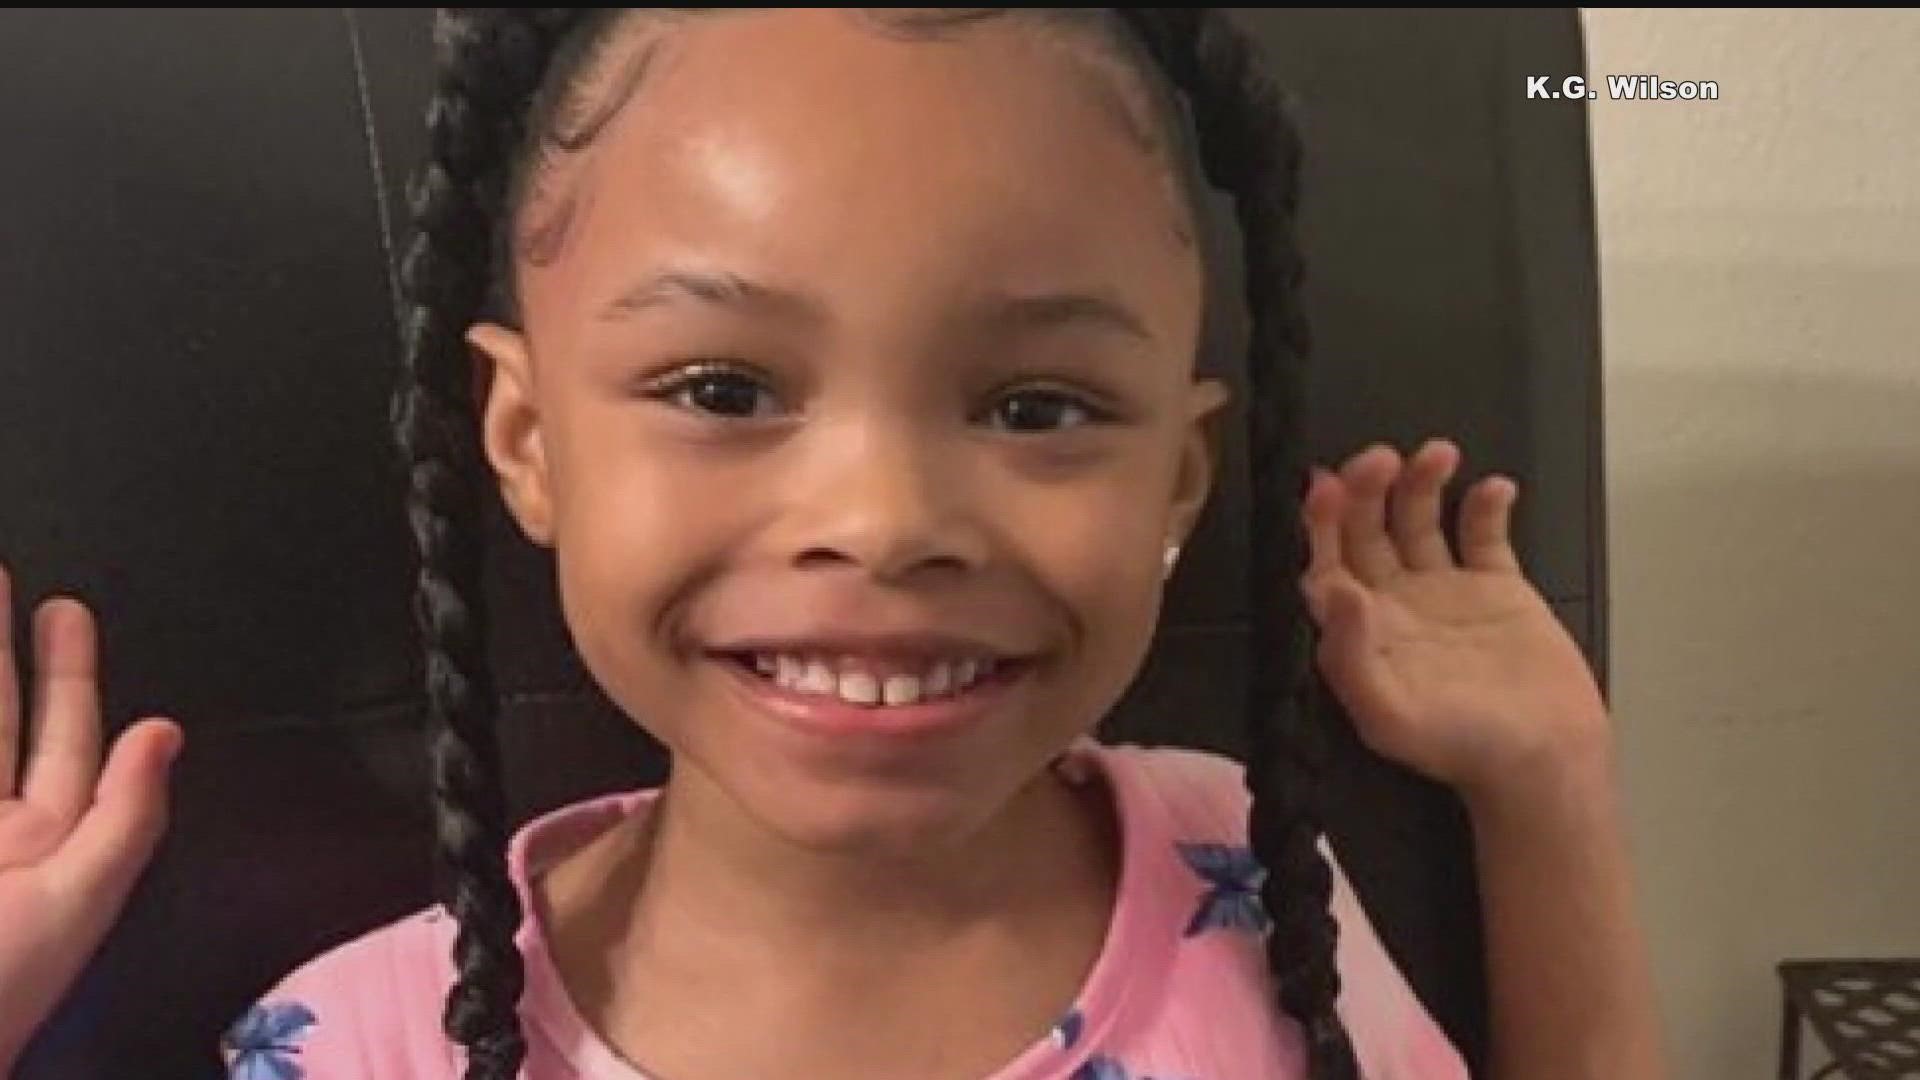 The 6-year-old was killed by a stray bullet while eating a McDonald's Happy Meal in the backseat of her parent's car.